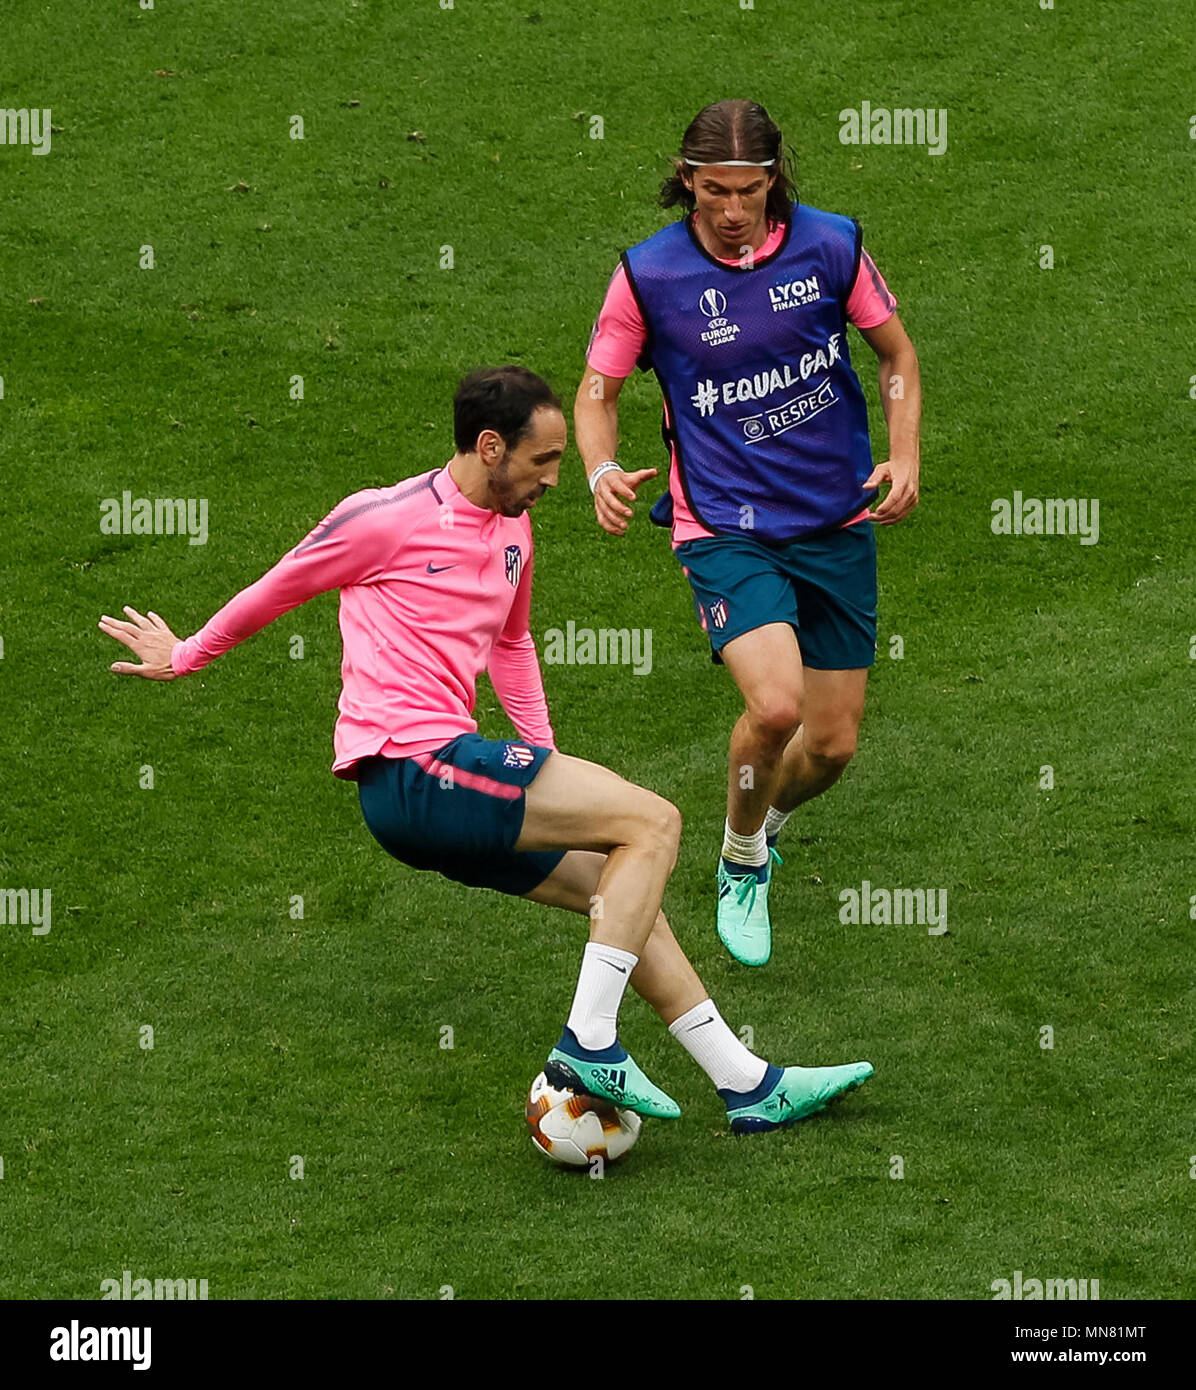 Filipe Luis of Atletico Madrid and Diego Godin of Atletico Madrid during a Atletico Madrid training session, prior to the Europa League final, at Parc Olympique Lyonnais on May 15th 2018 in Lyon, France. (Photo by Daniel Chesterton/phcimages.com) Stock Photo